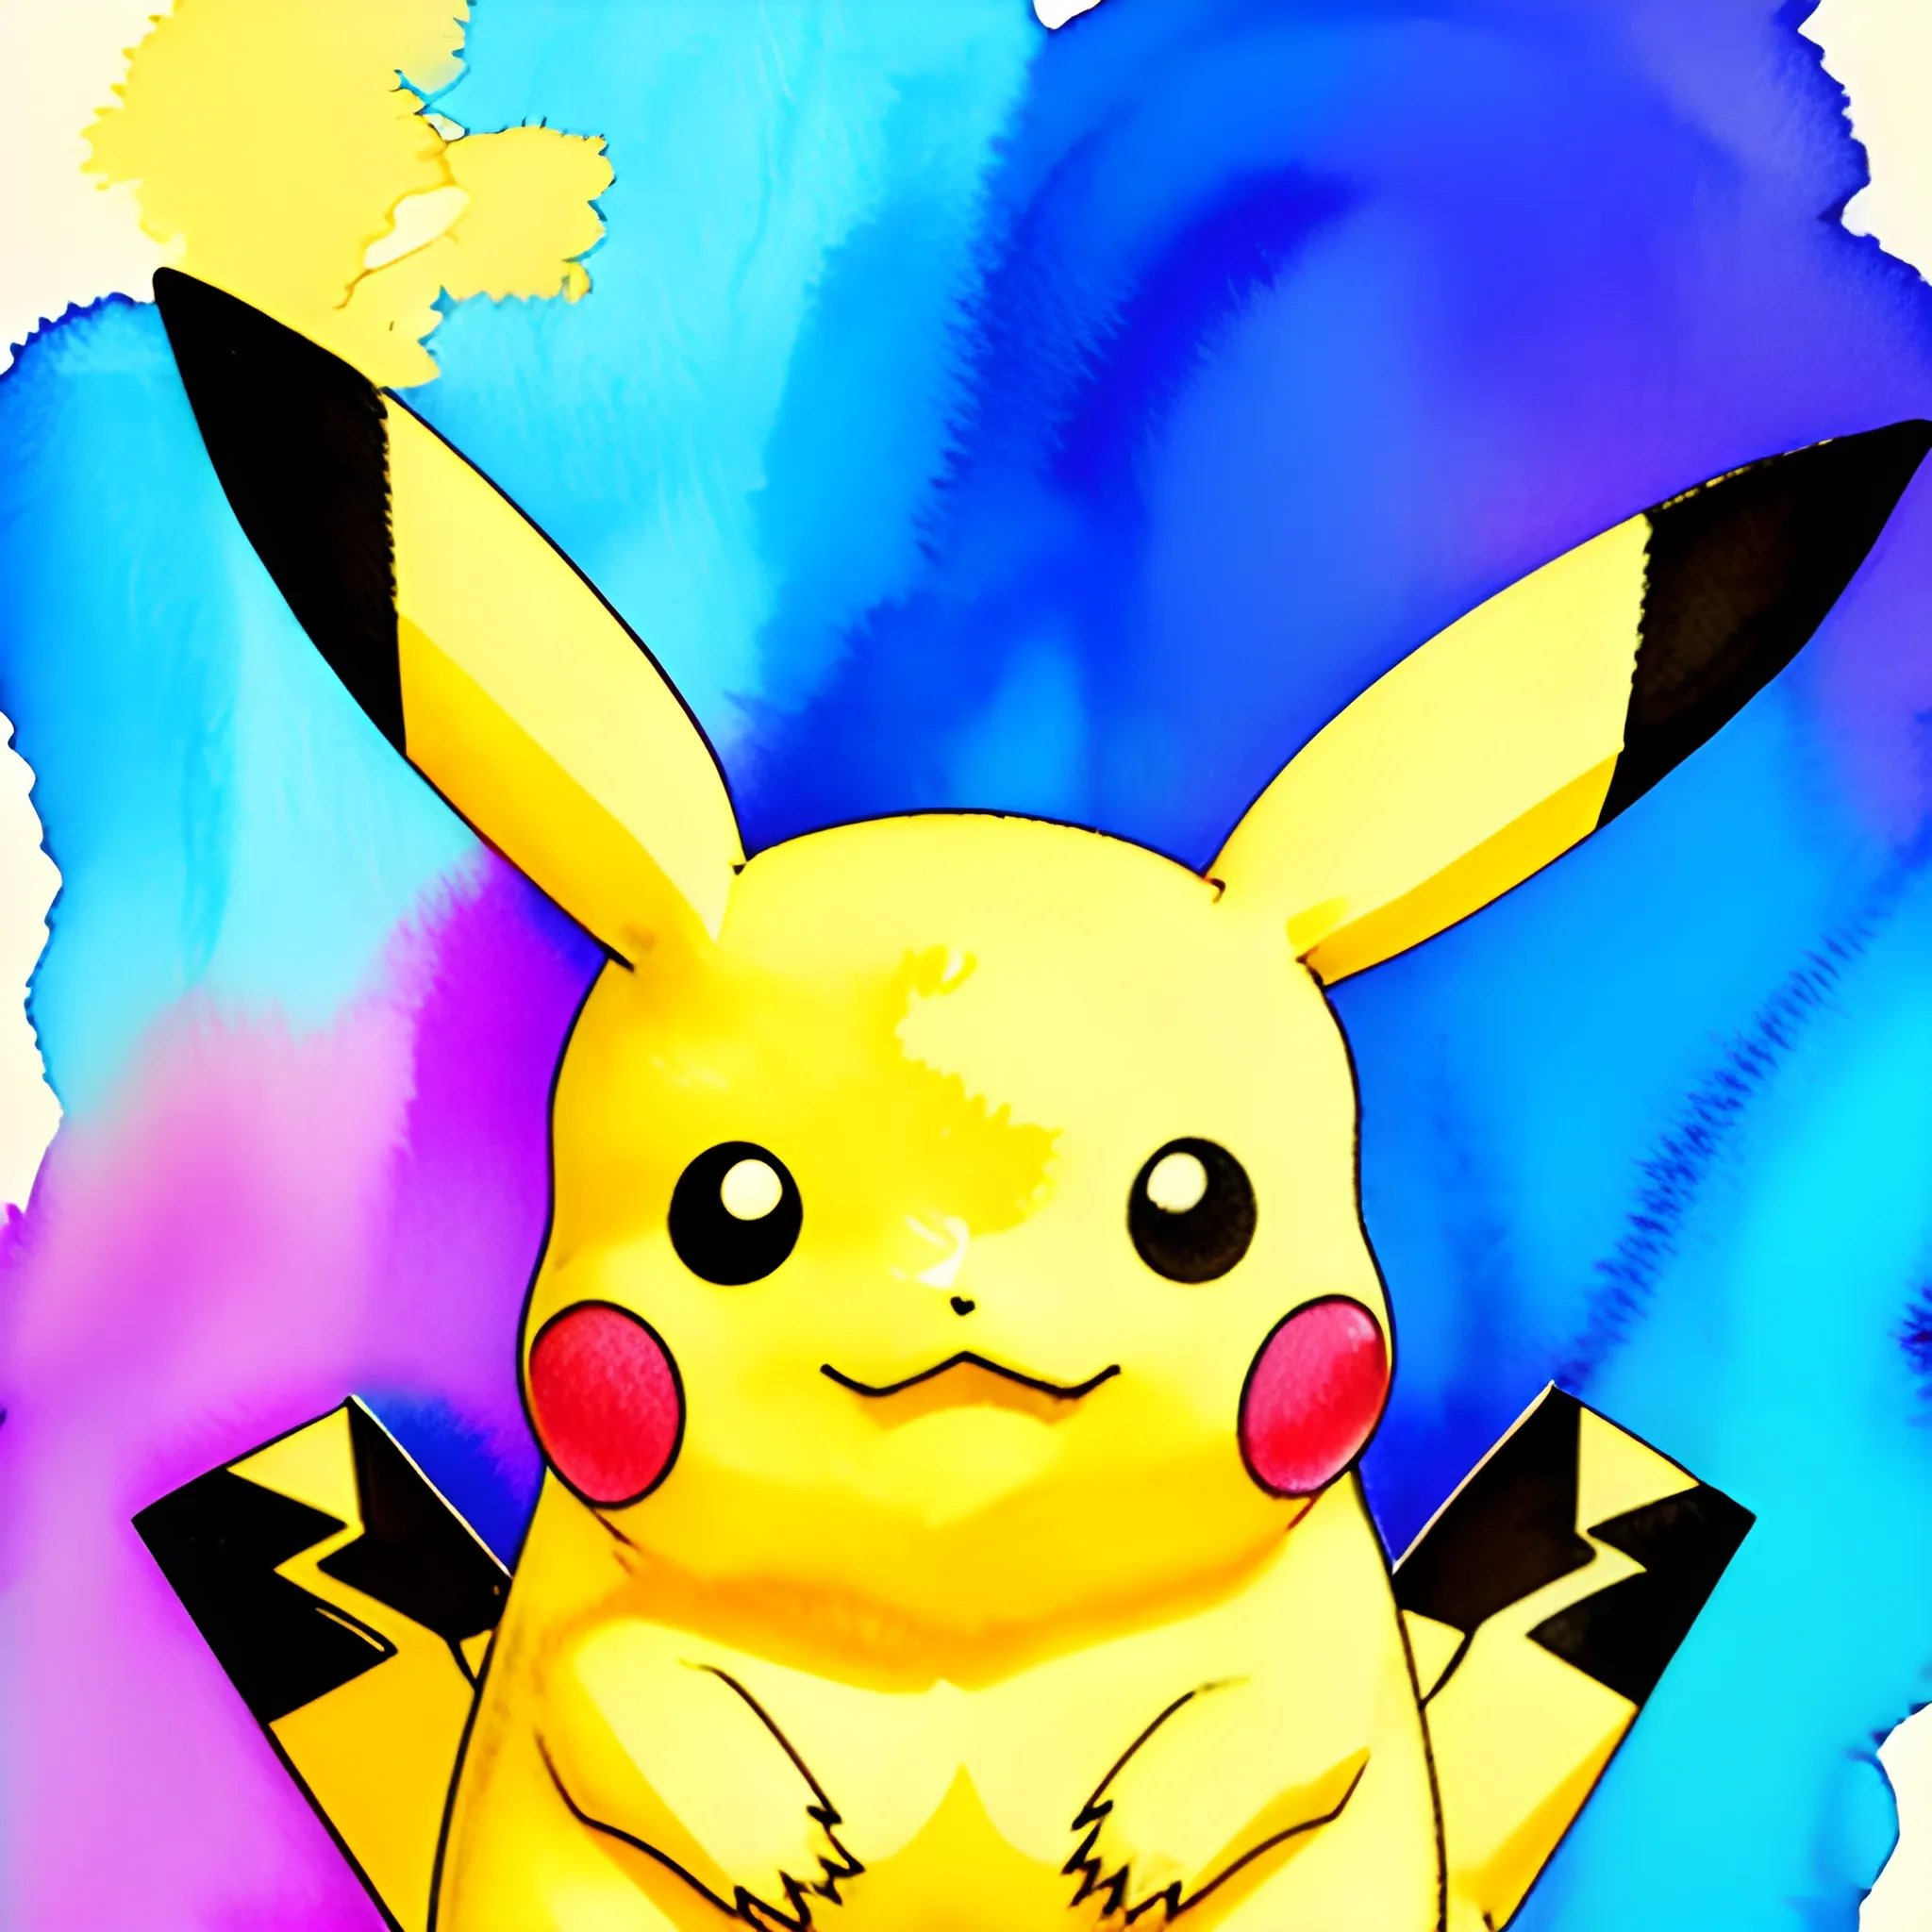 
Pikachu, shiny, Water Color